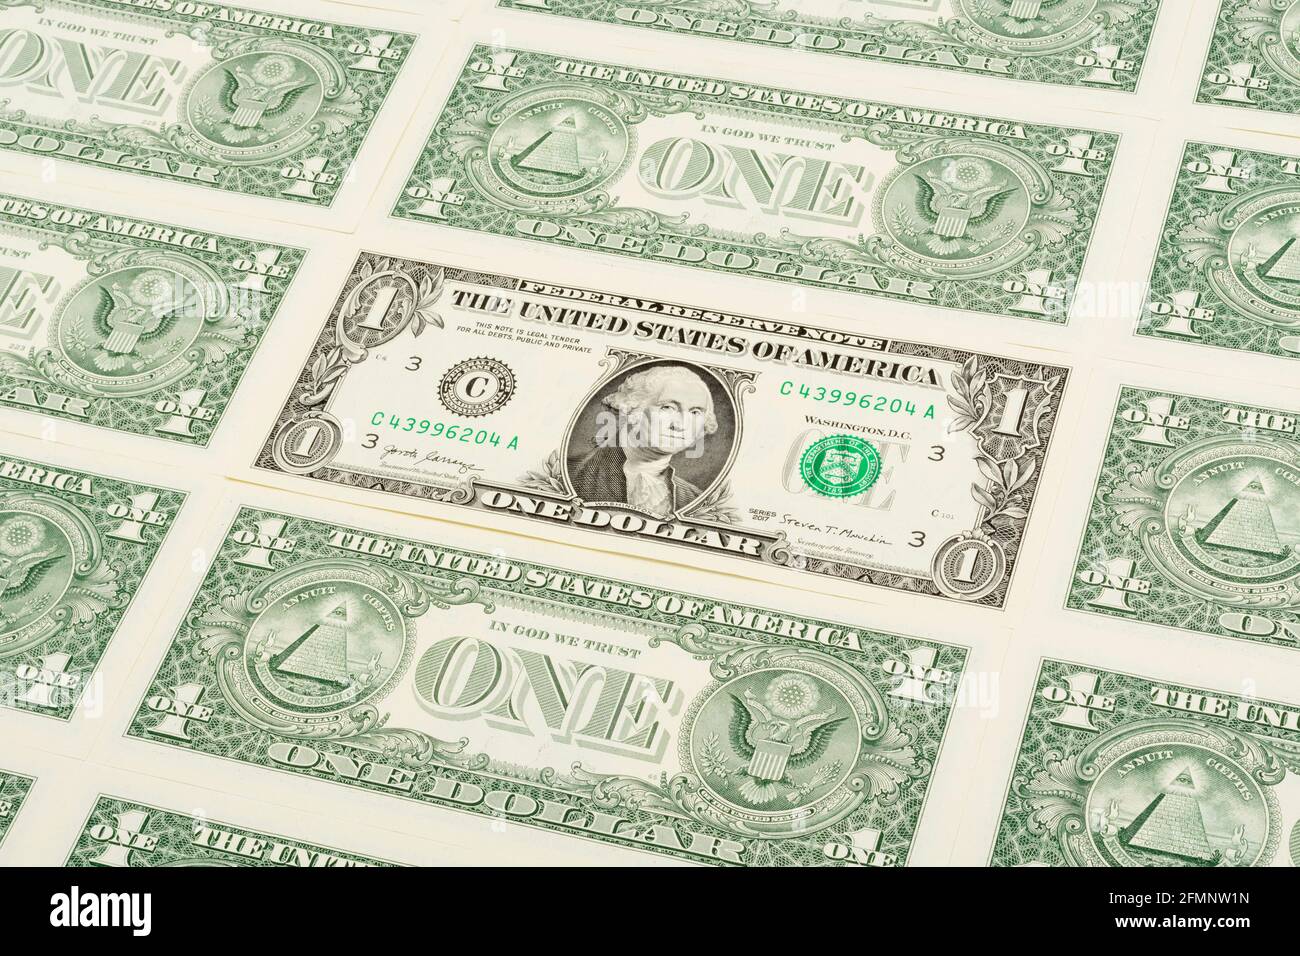 Reverse & Obverse sides of US $1 / one dollar bills arranged in formation. For US trillion $ debt mountain, US personal savings & 401k, US bank crisis Stock Photo